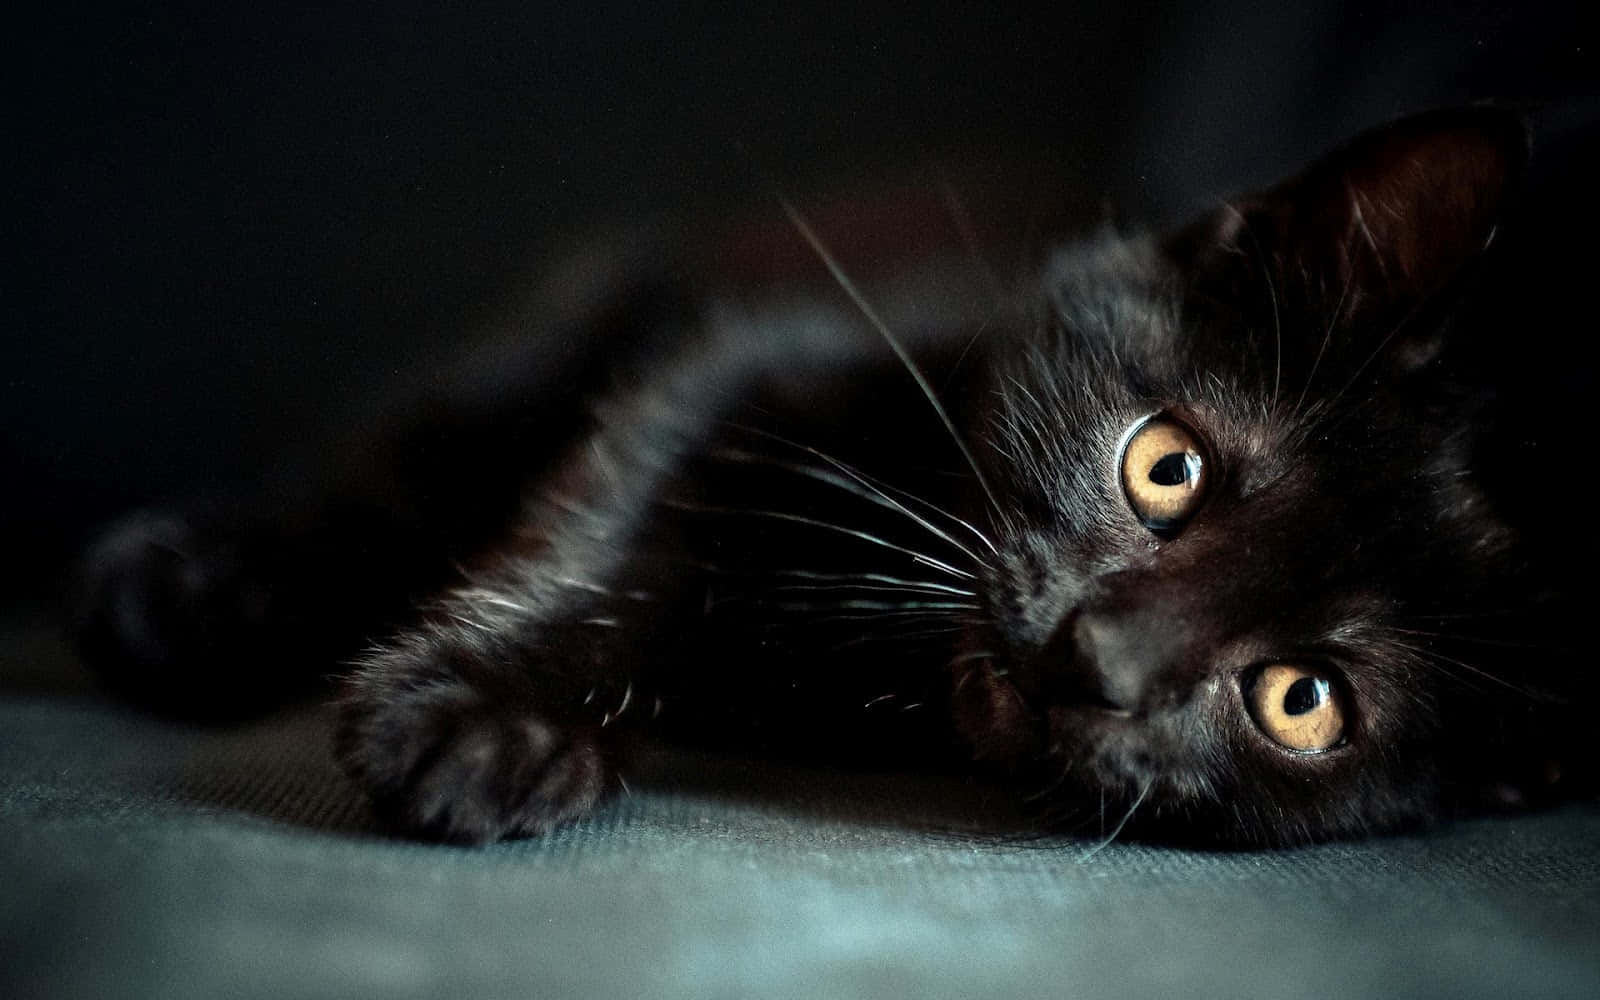 "Who says black cats are bad luck?"